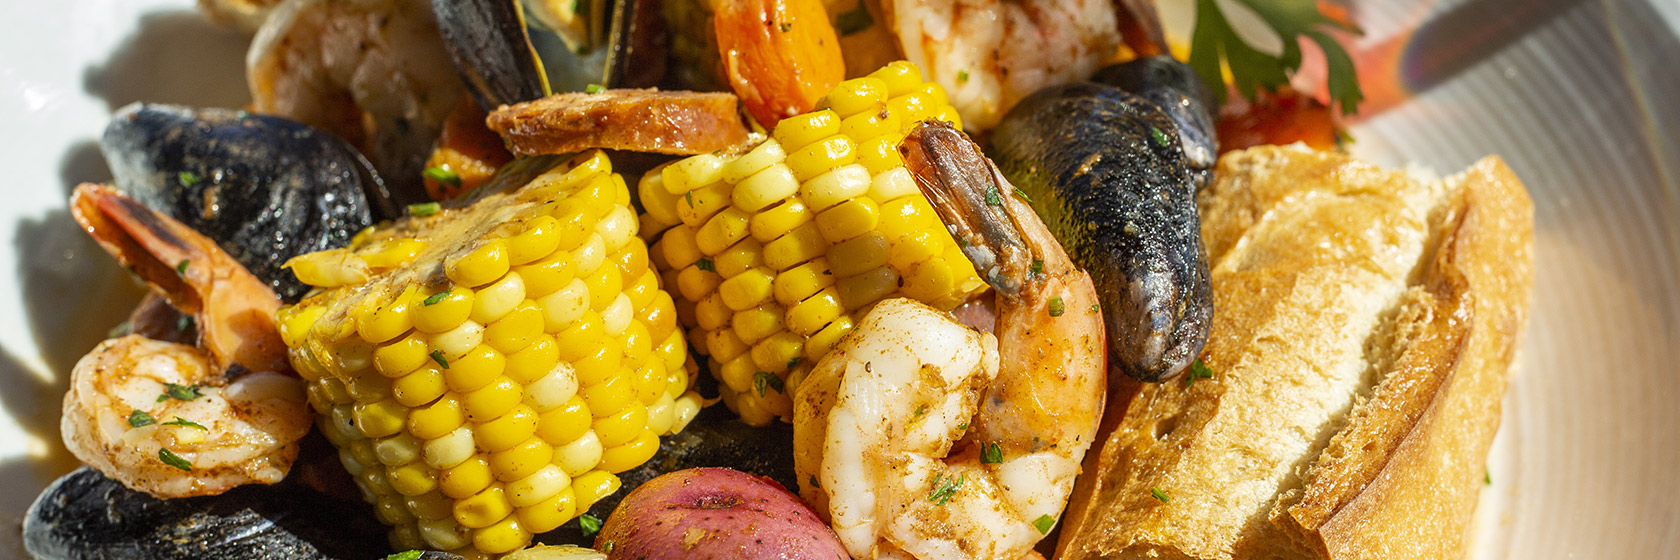 Close-up of Seafood Boil entree with sausage, shrimp, corn, mussels and red potatoes